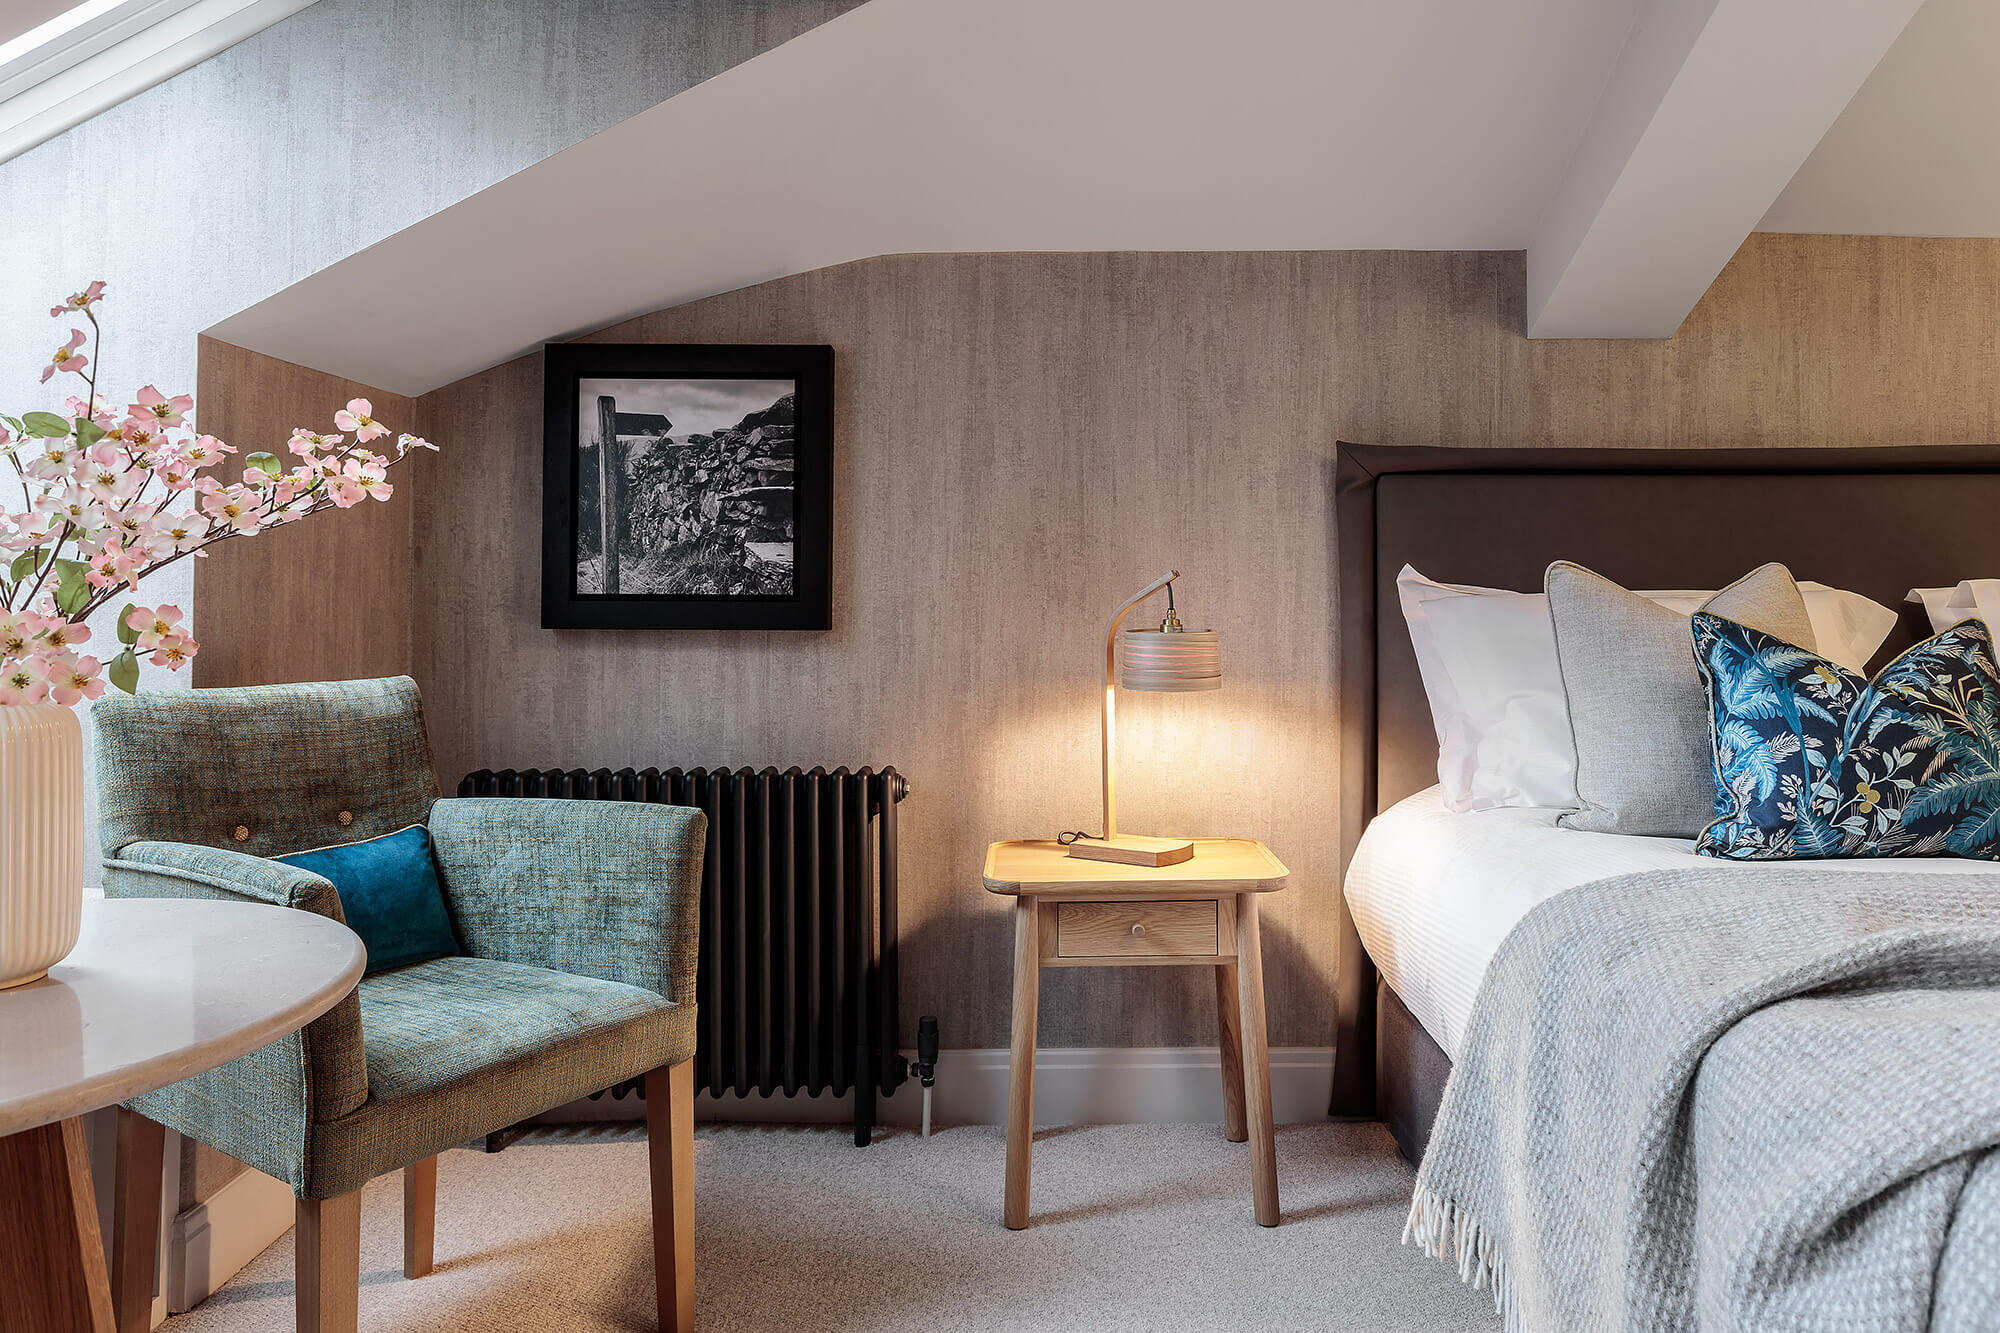 The Attic Room at The Langdale Hotel & Spa in the Lake District